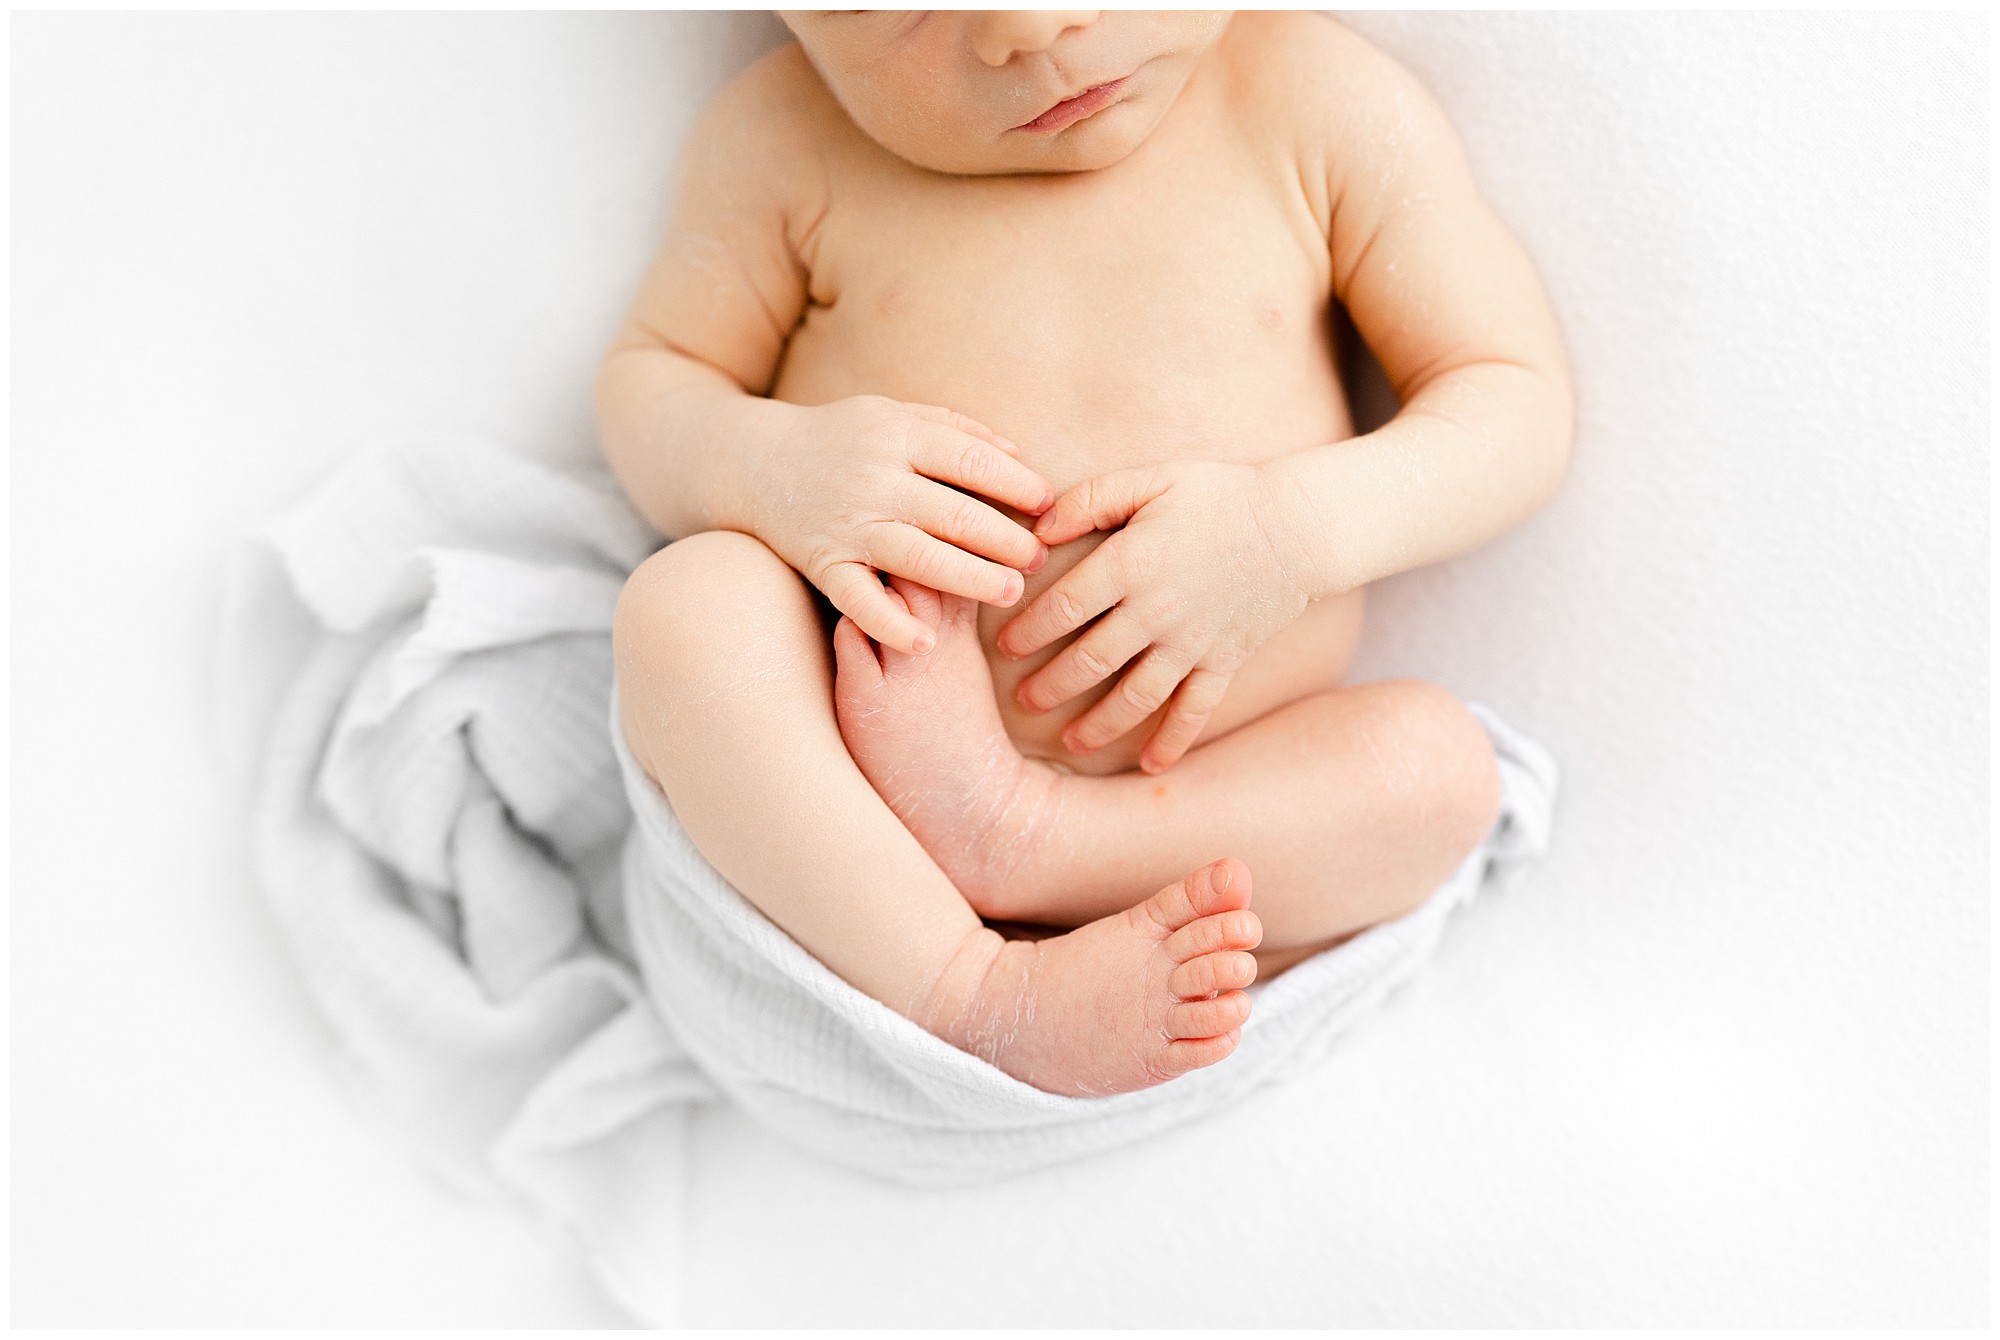 Portrait of a newborn baby's legs and hands folded.